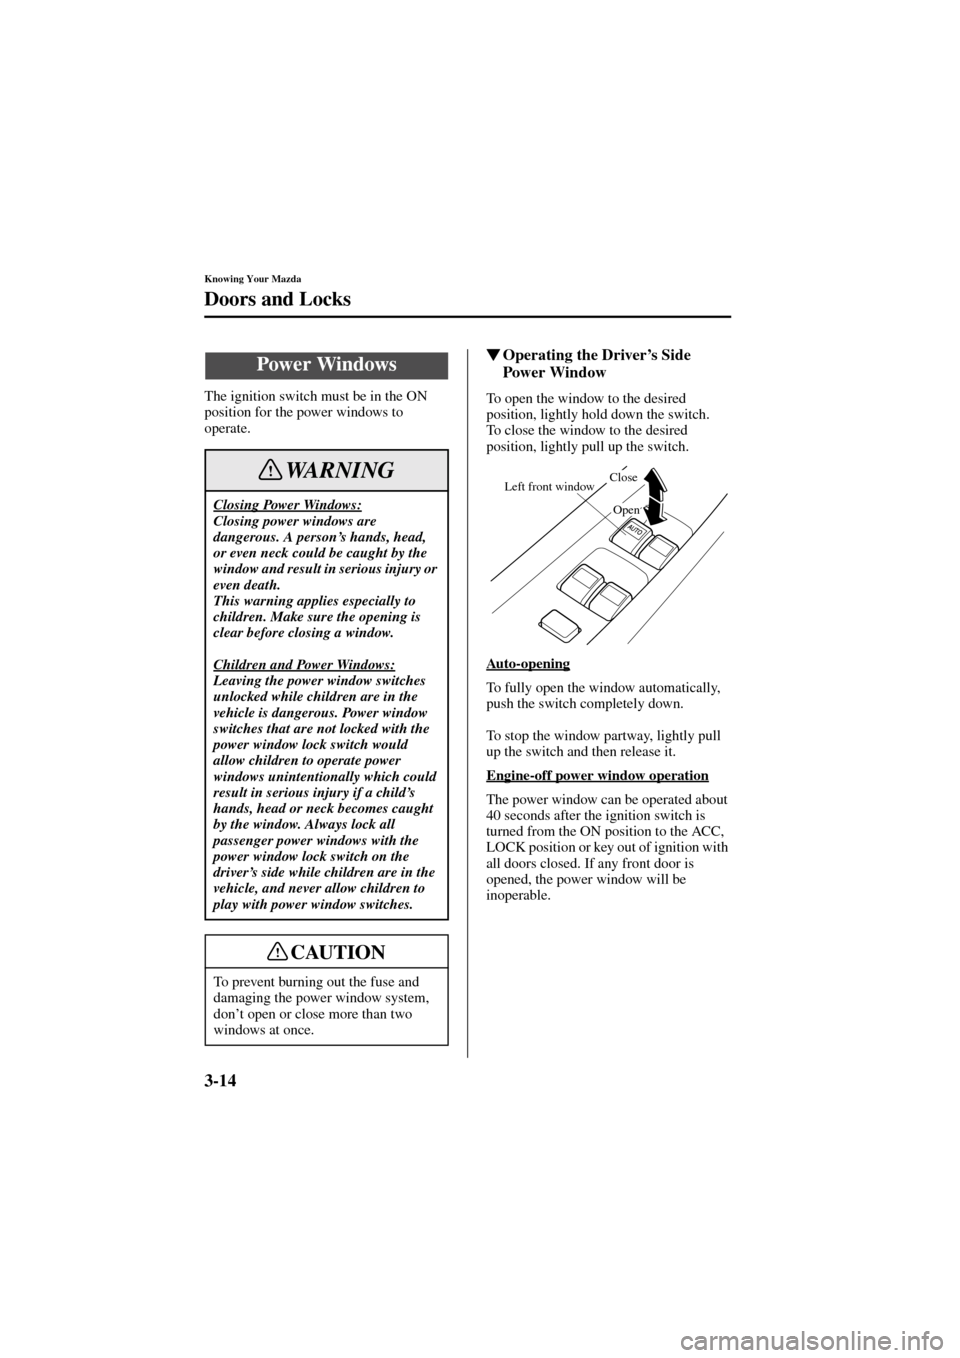 MAZDA MODEL 6 2004   (in English) User Guide 3-14
Knowing Your Mazda
Doors and Locks
Form No. 8R29-EA-02I
The ignition switch must be in the ON 
position for the power windows to 
operate.
Operating the Driver’s Side 
Power Window
To open the